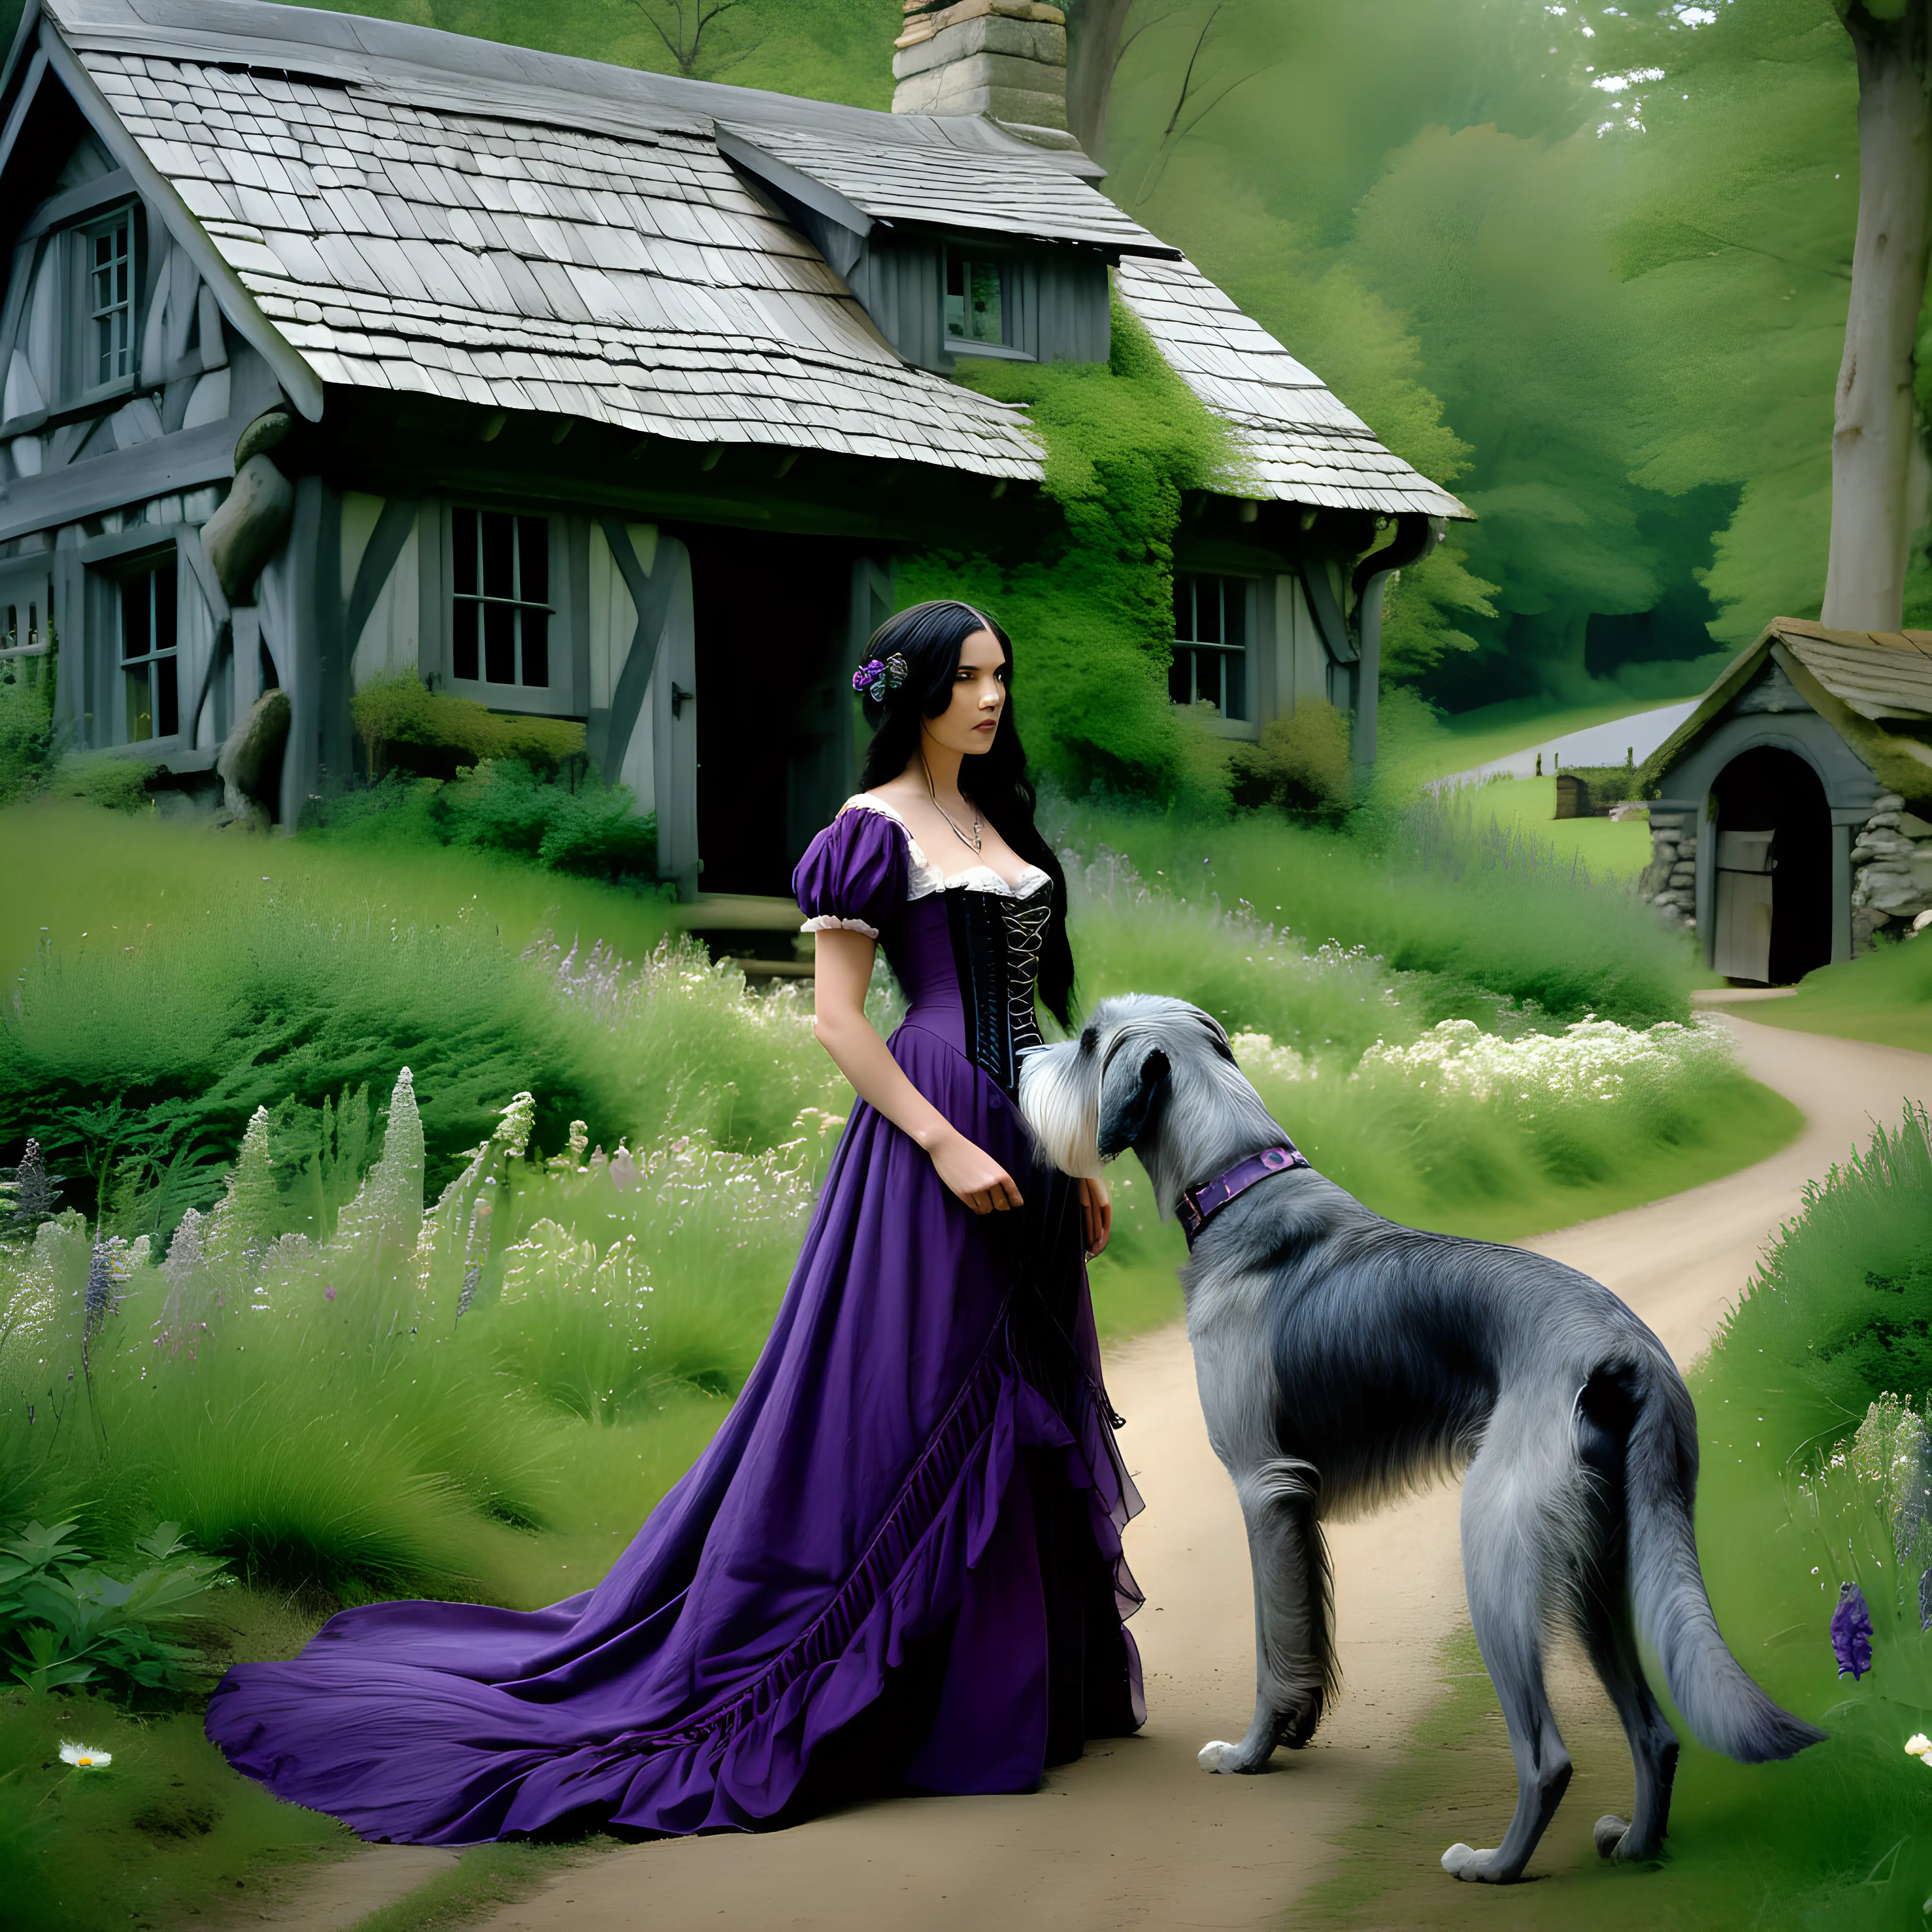 in the middle of a deep dark forest, beautiful woman with long black hair done up in braids on top of her head wearing an 1800's tightly corseted purple gown, she is standing in front of an old cottage with her playful gray irish wolfhound, the scenery is lush and green with many flowers growing around the cottage